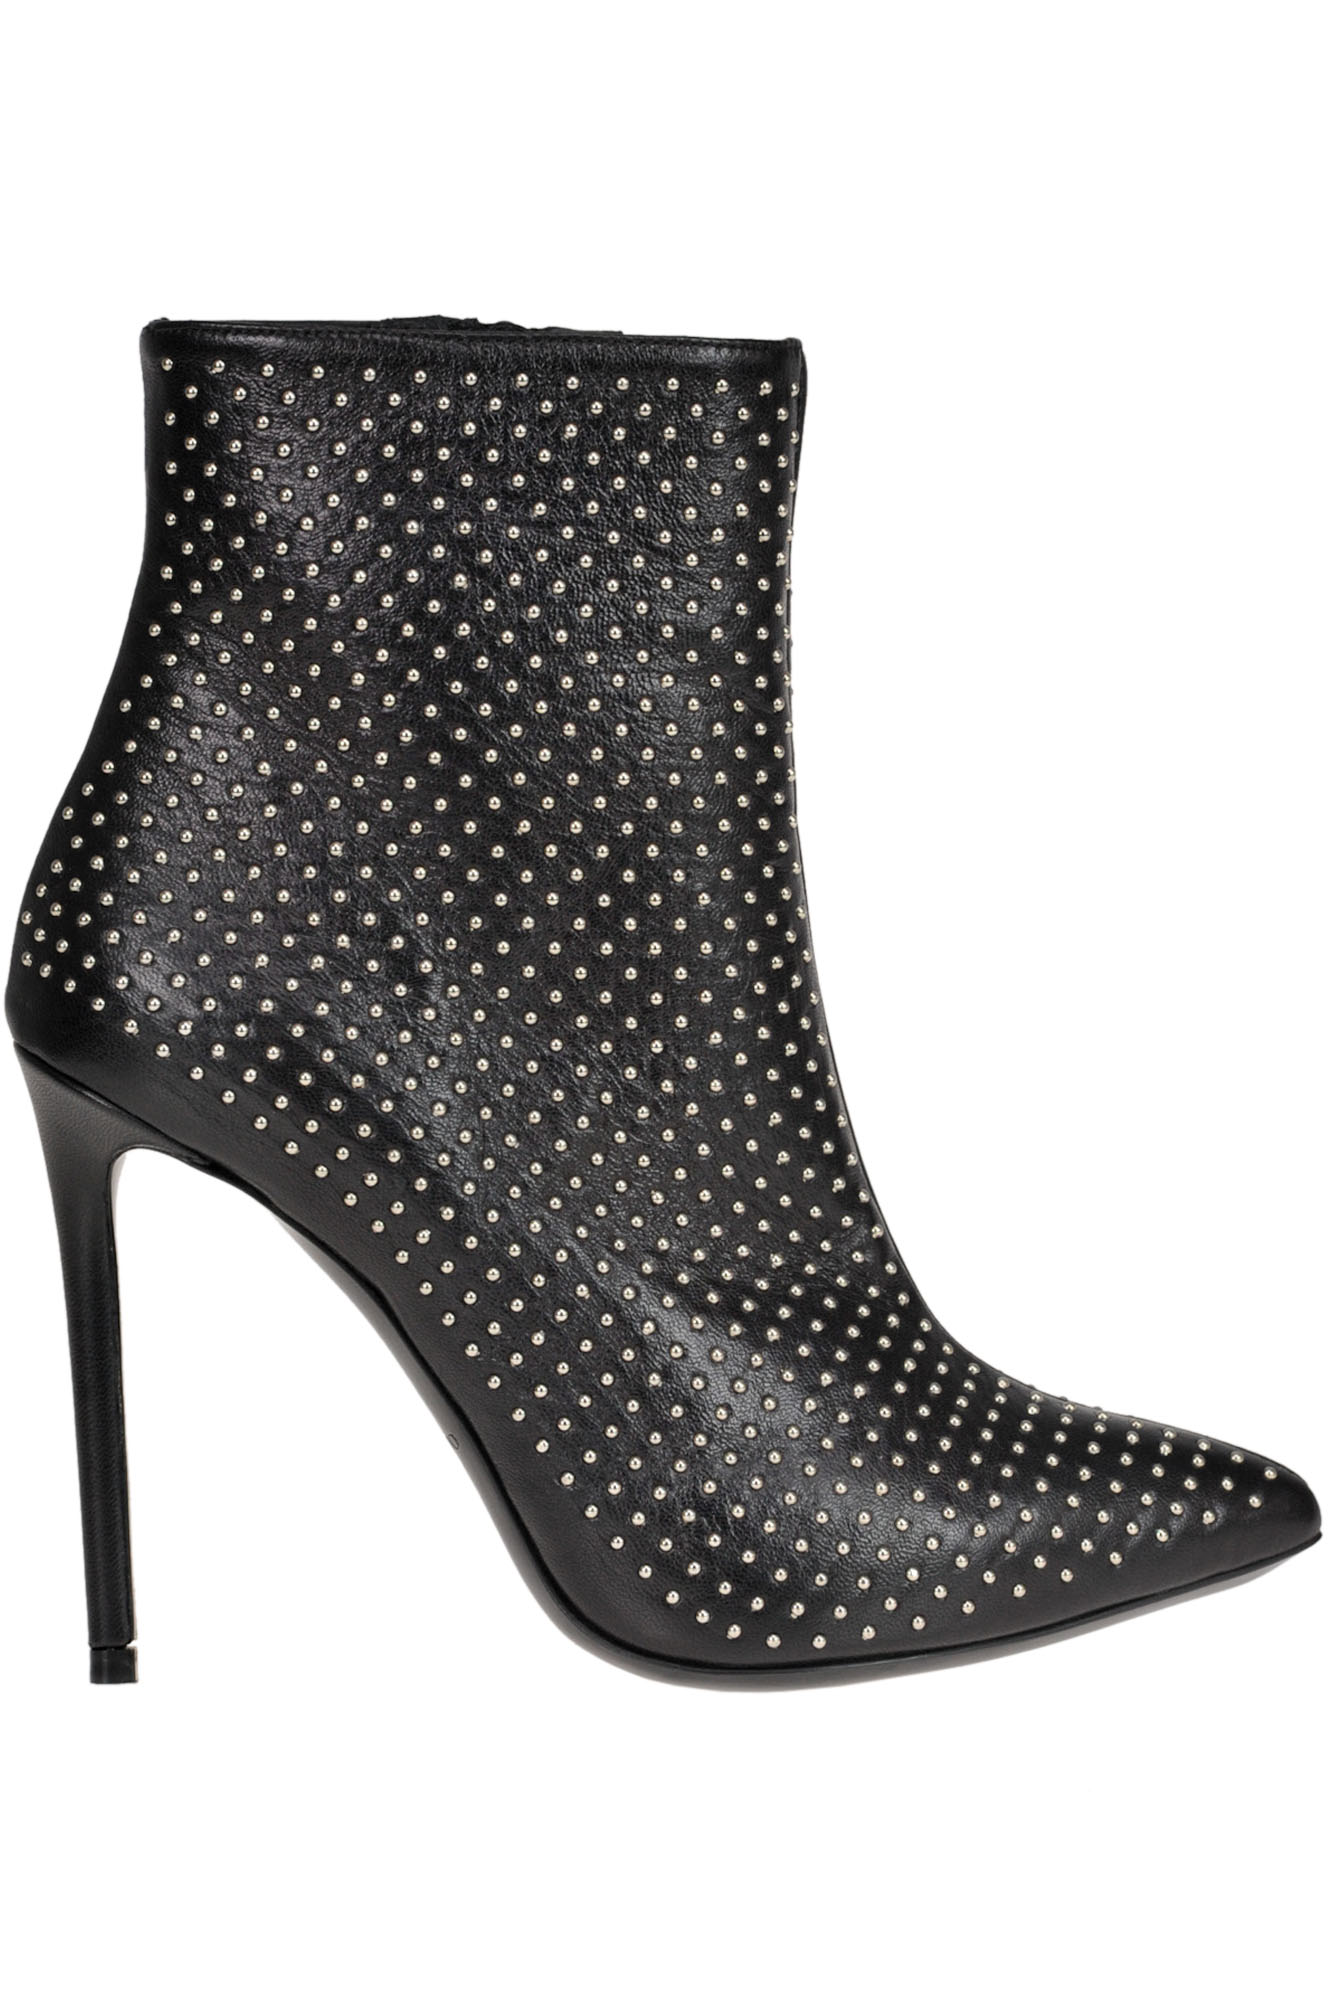 MARC ELLIS STUDDED LEATHER ANKLE BOOTS